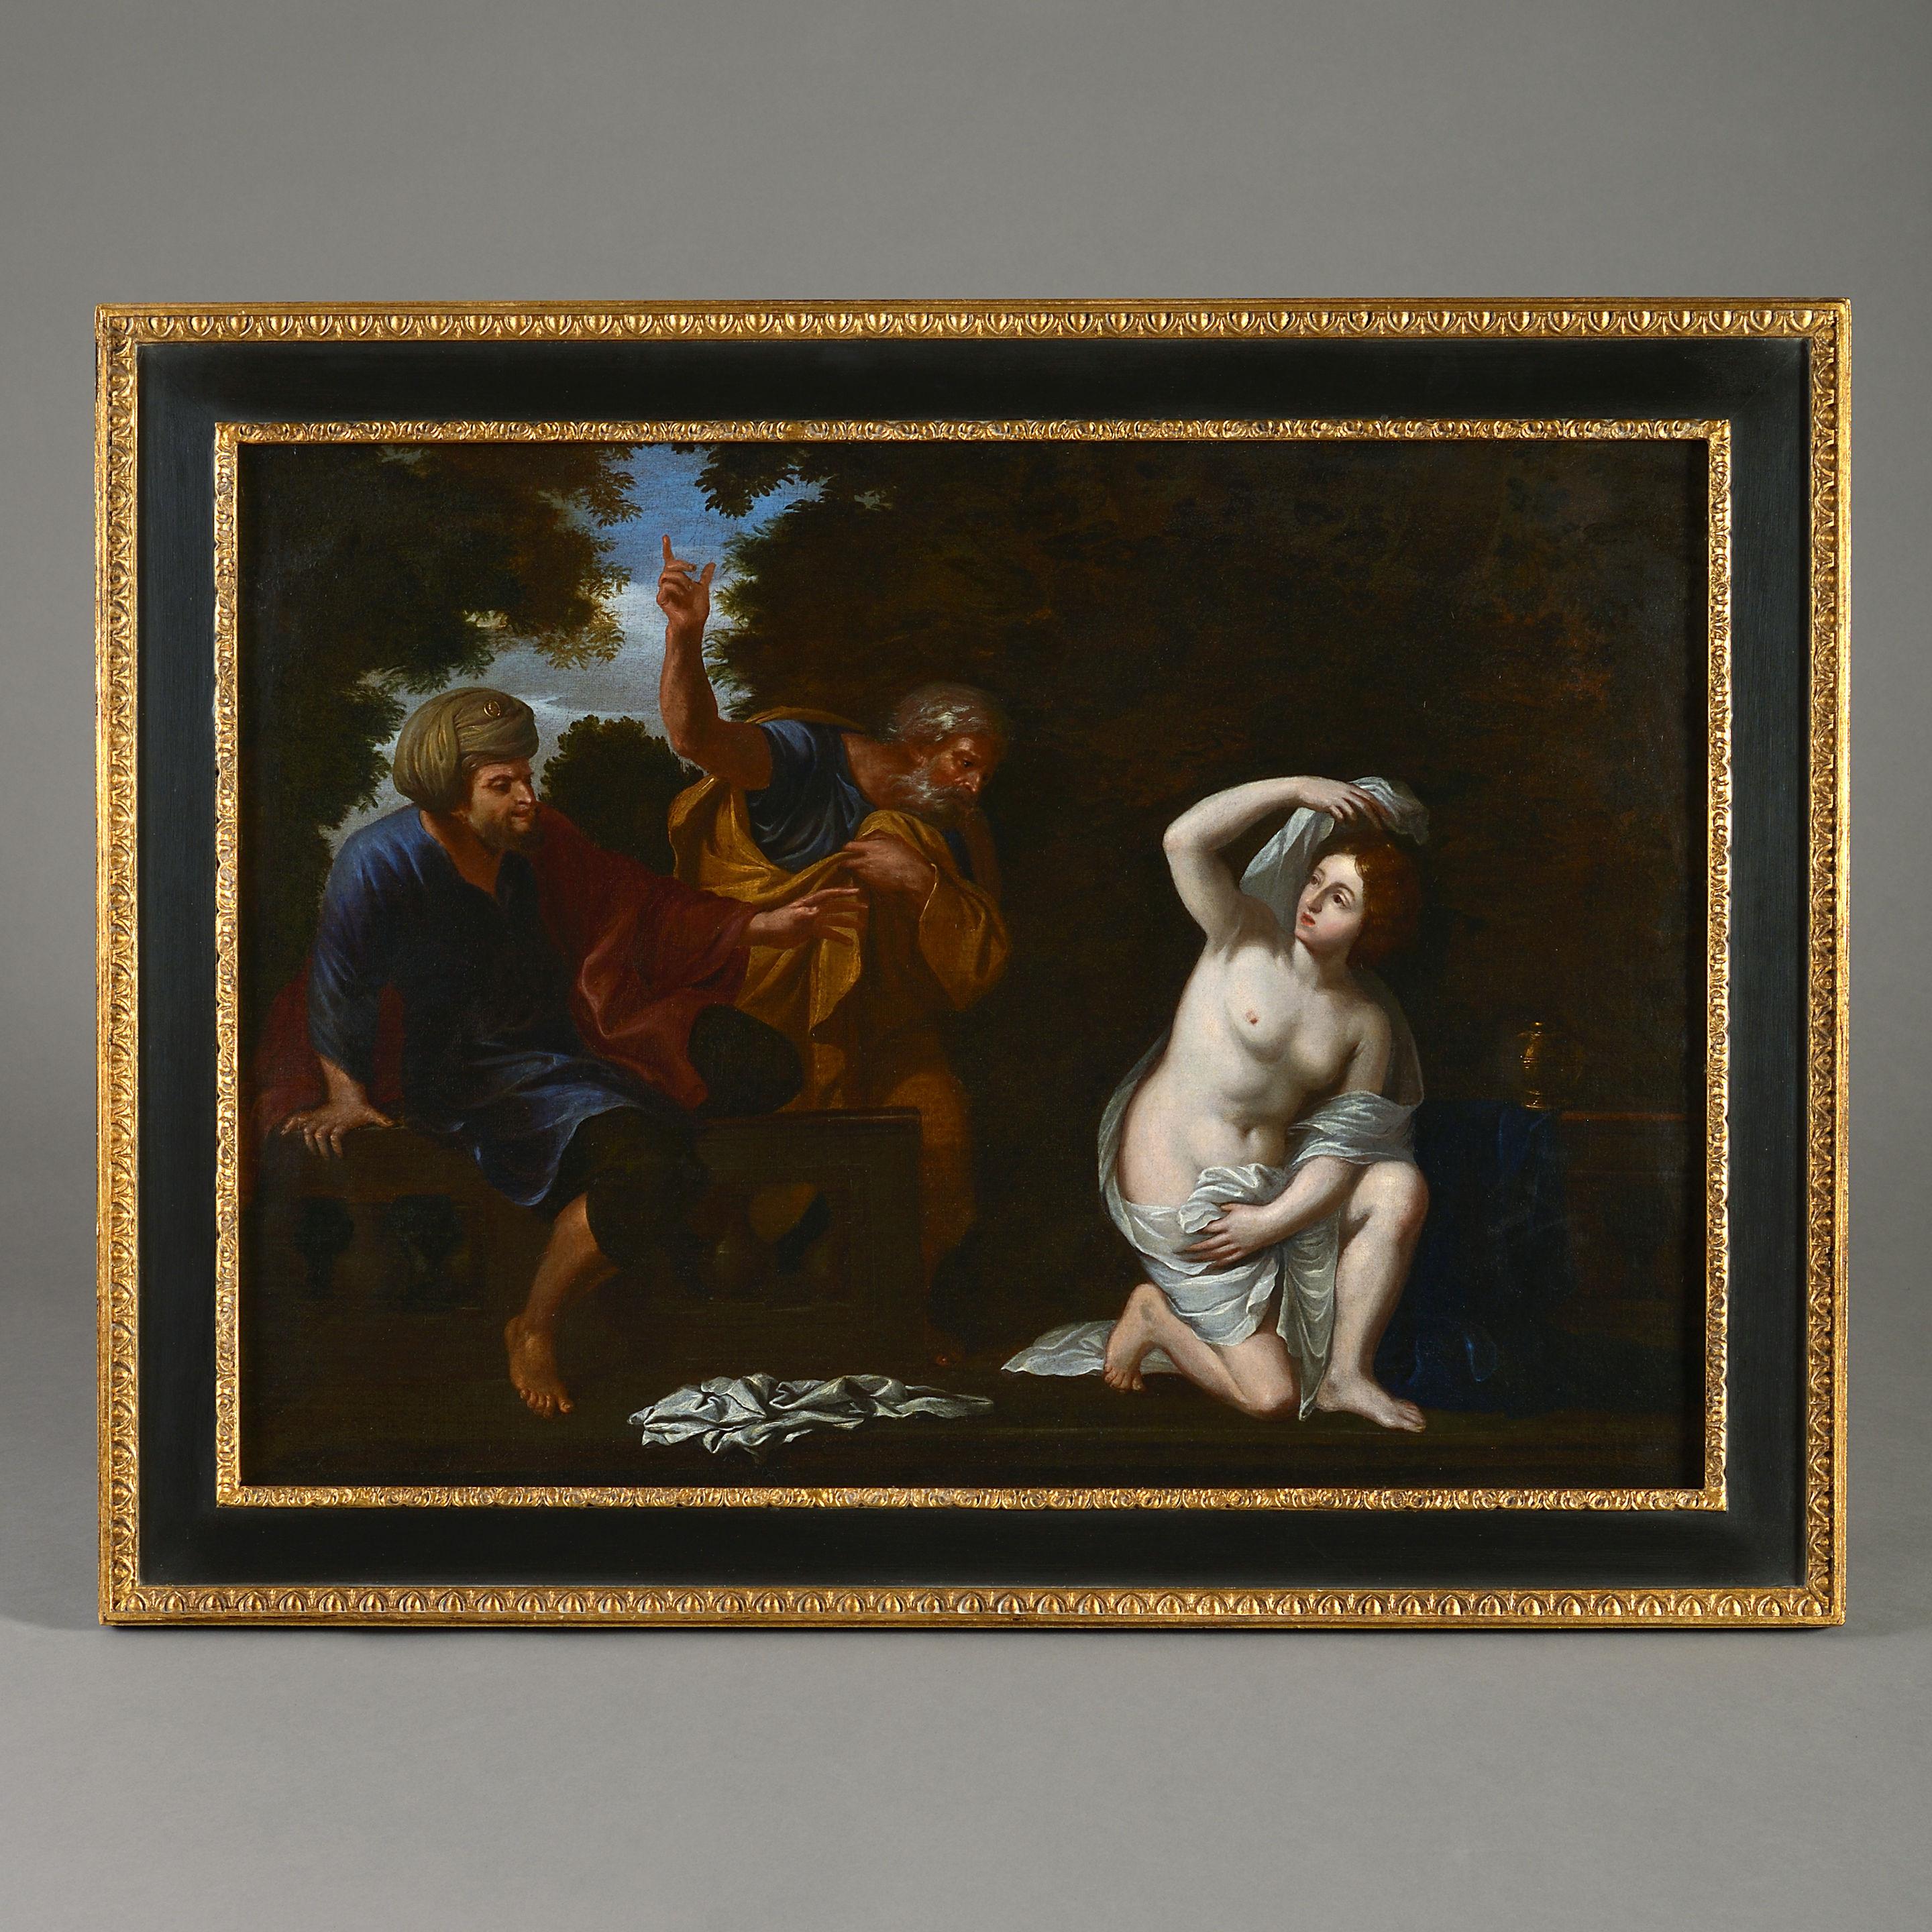 Unknown Nude Painting - 17th Century Italian School Oil - Susanna and the Elders